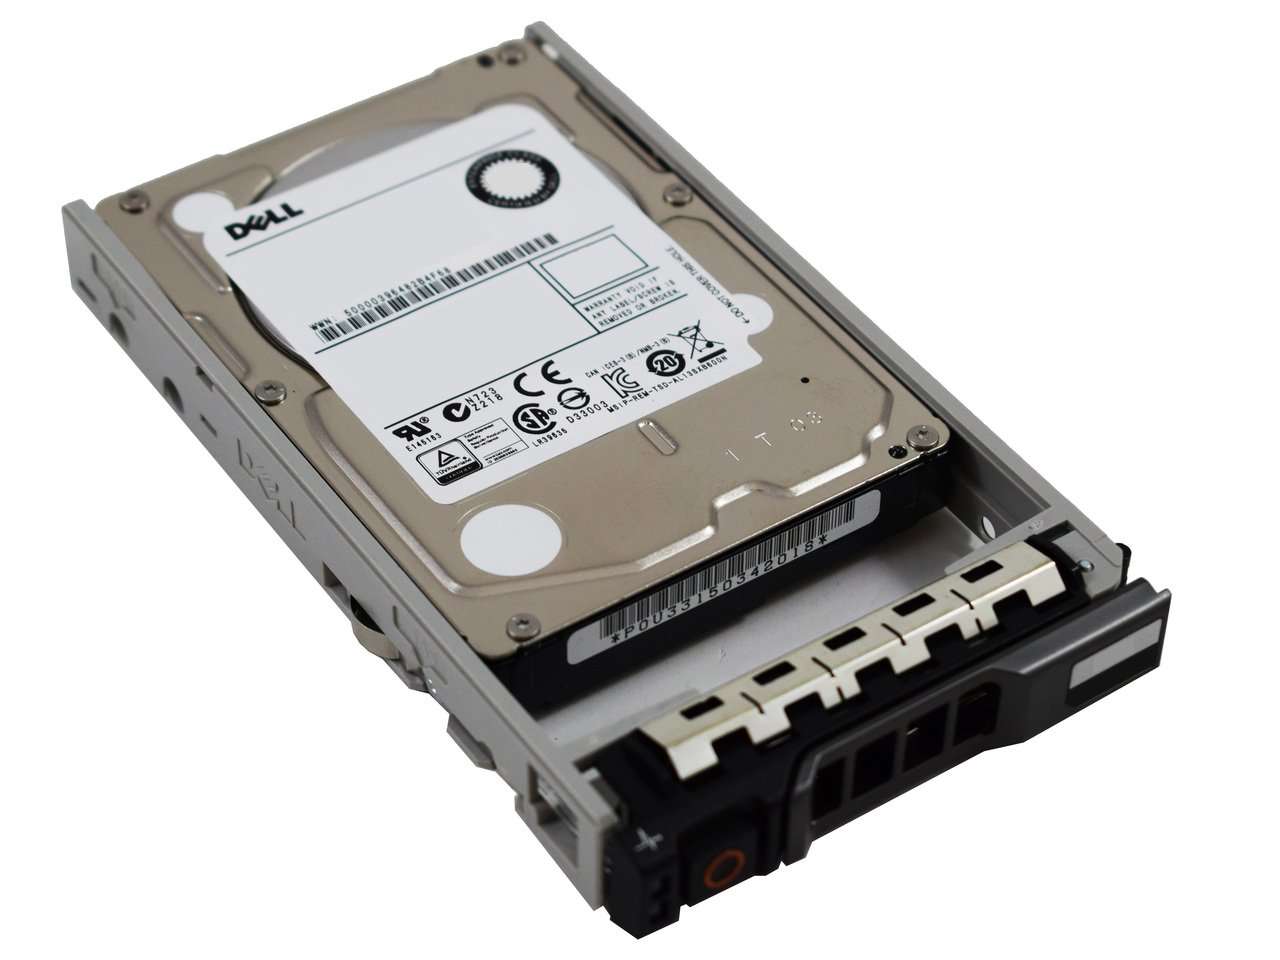 Dell G13 ST2000NX0463 2TB 7.2K RPM SAS 12Gb/s 512N 2.5" NearLine Manufacturer Recertified HDD